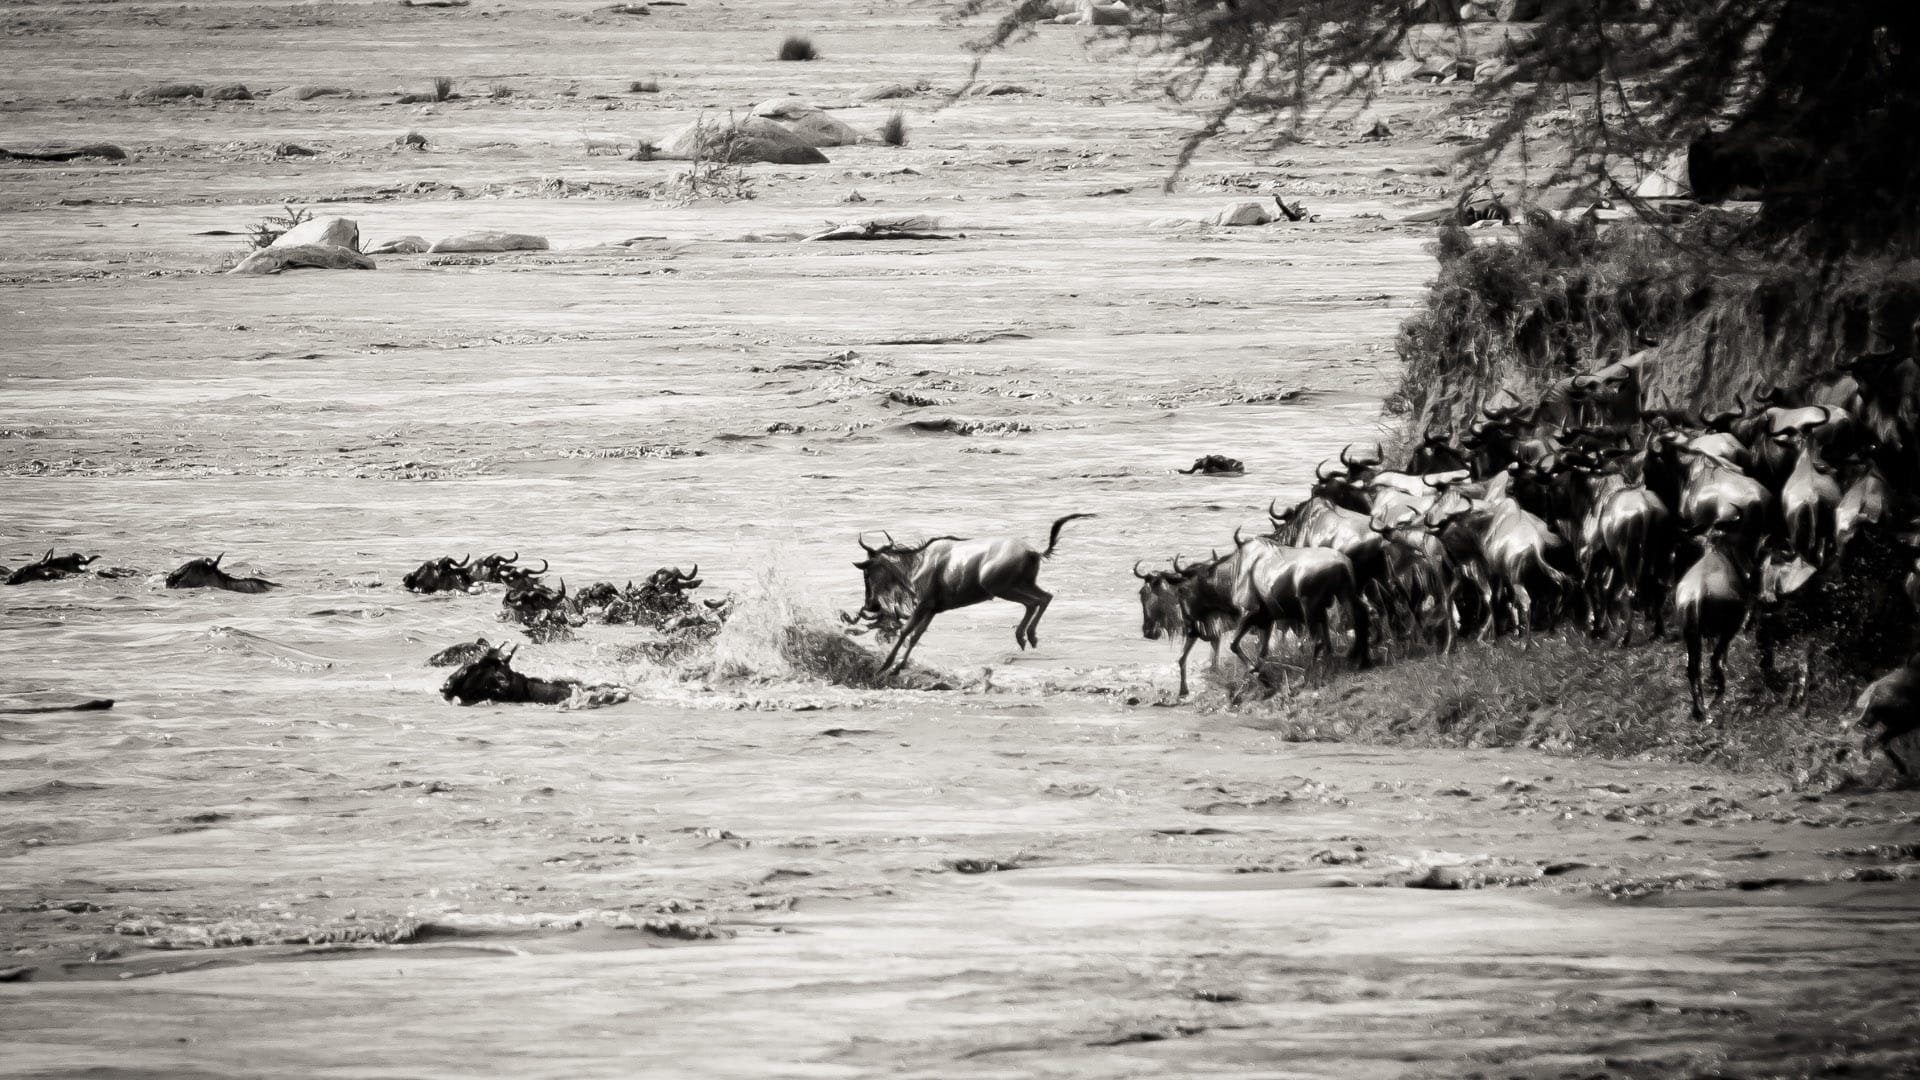 Wildebeest leaping into the Mara River